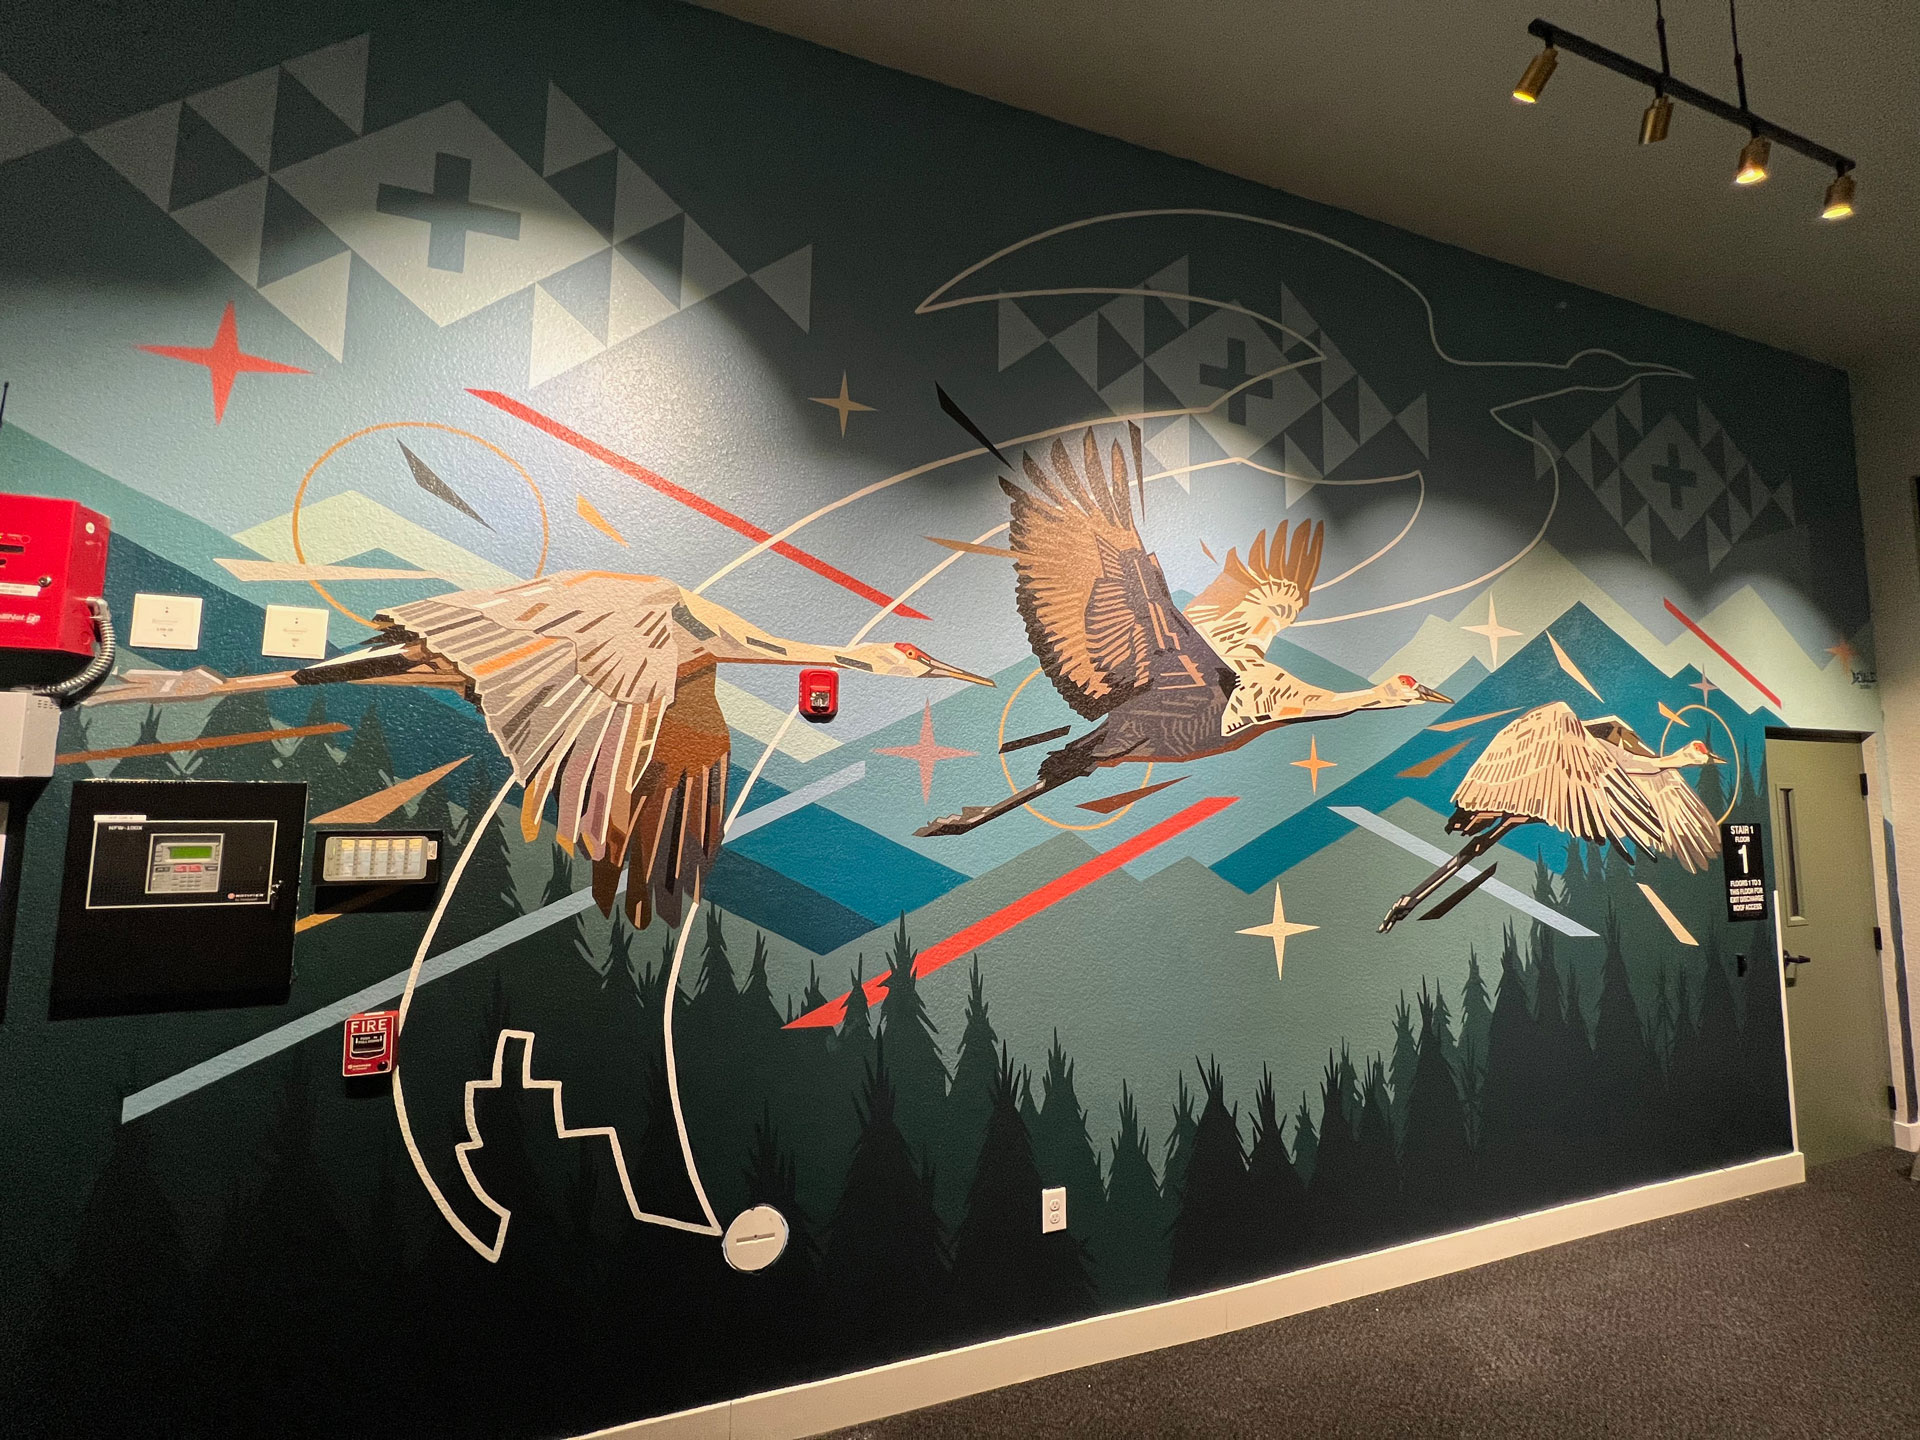 Photo 1 of 2 of mural completed at the Everett in Denver in October 2022. Interior photo.